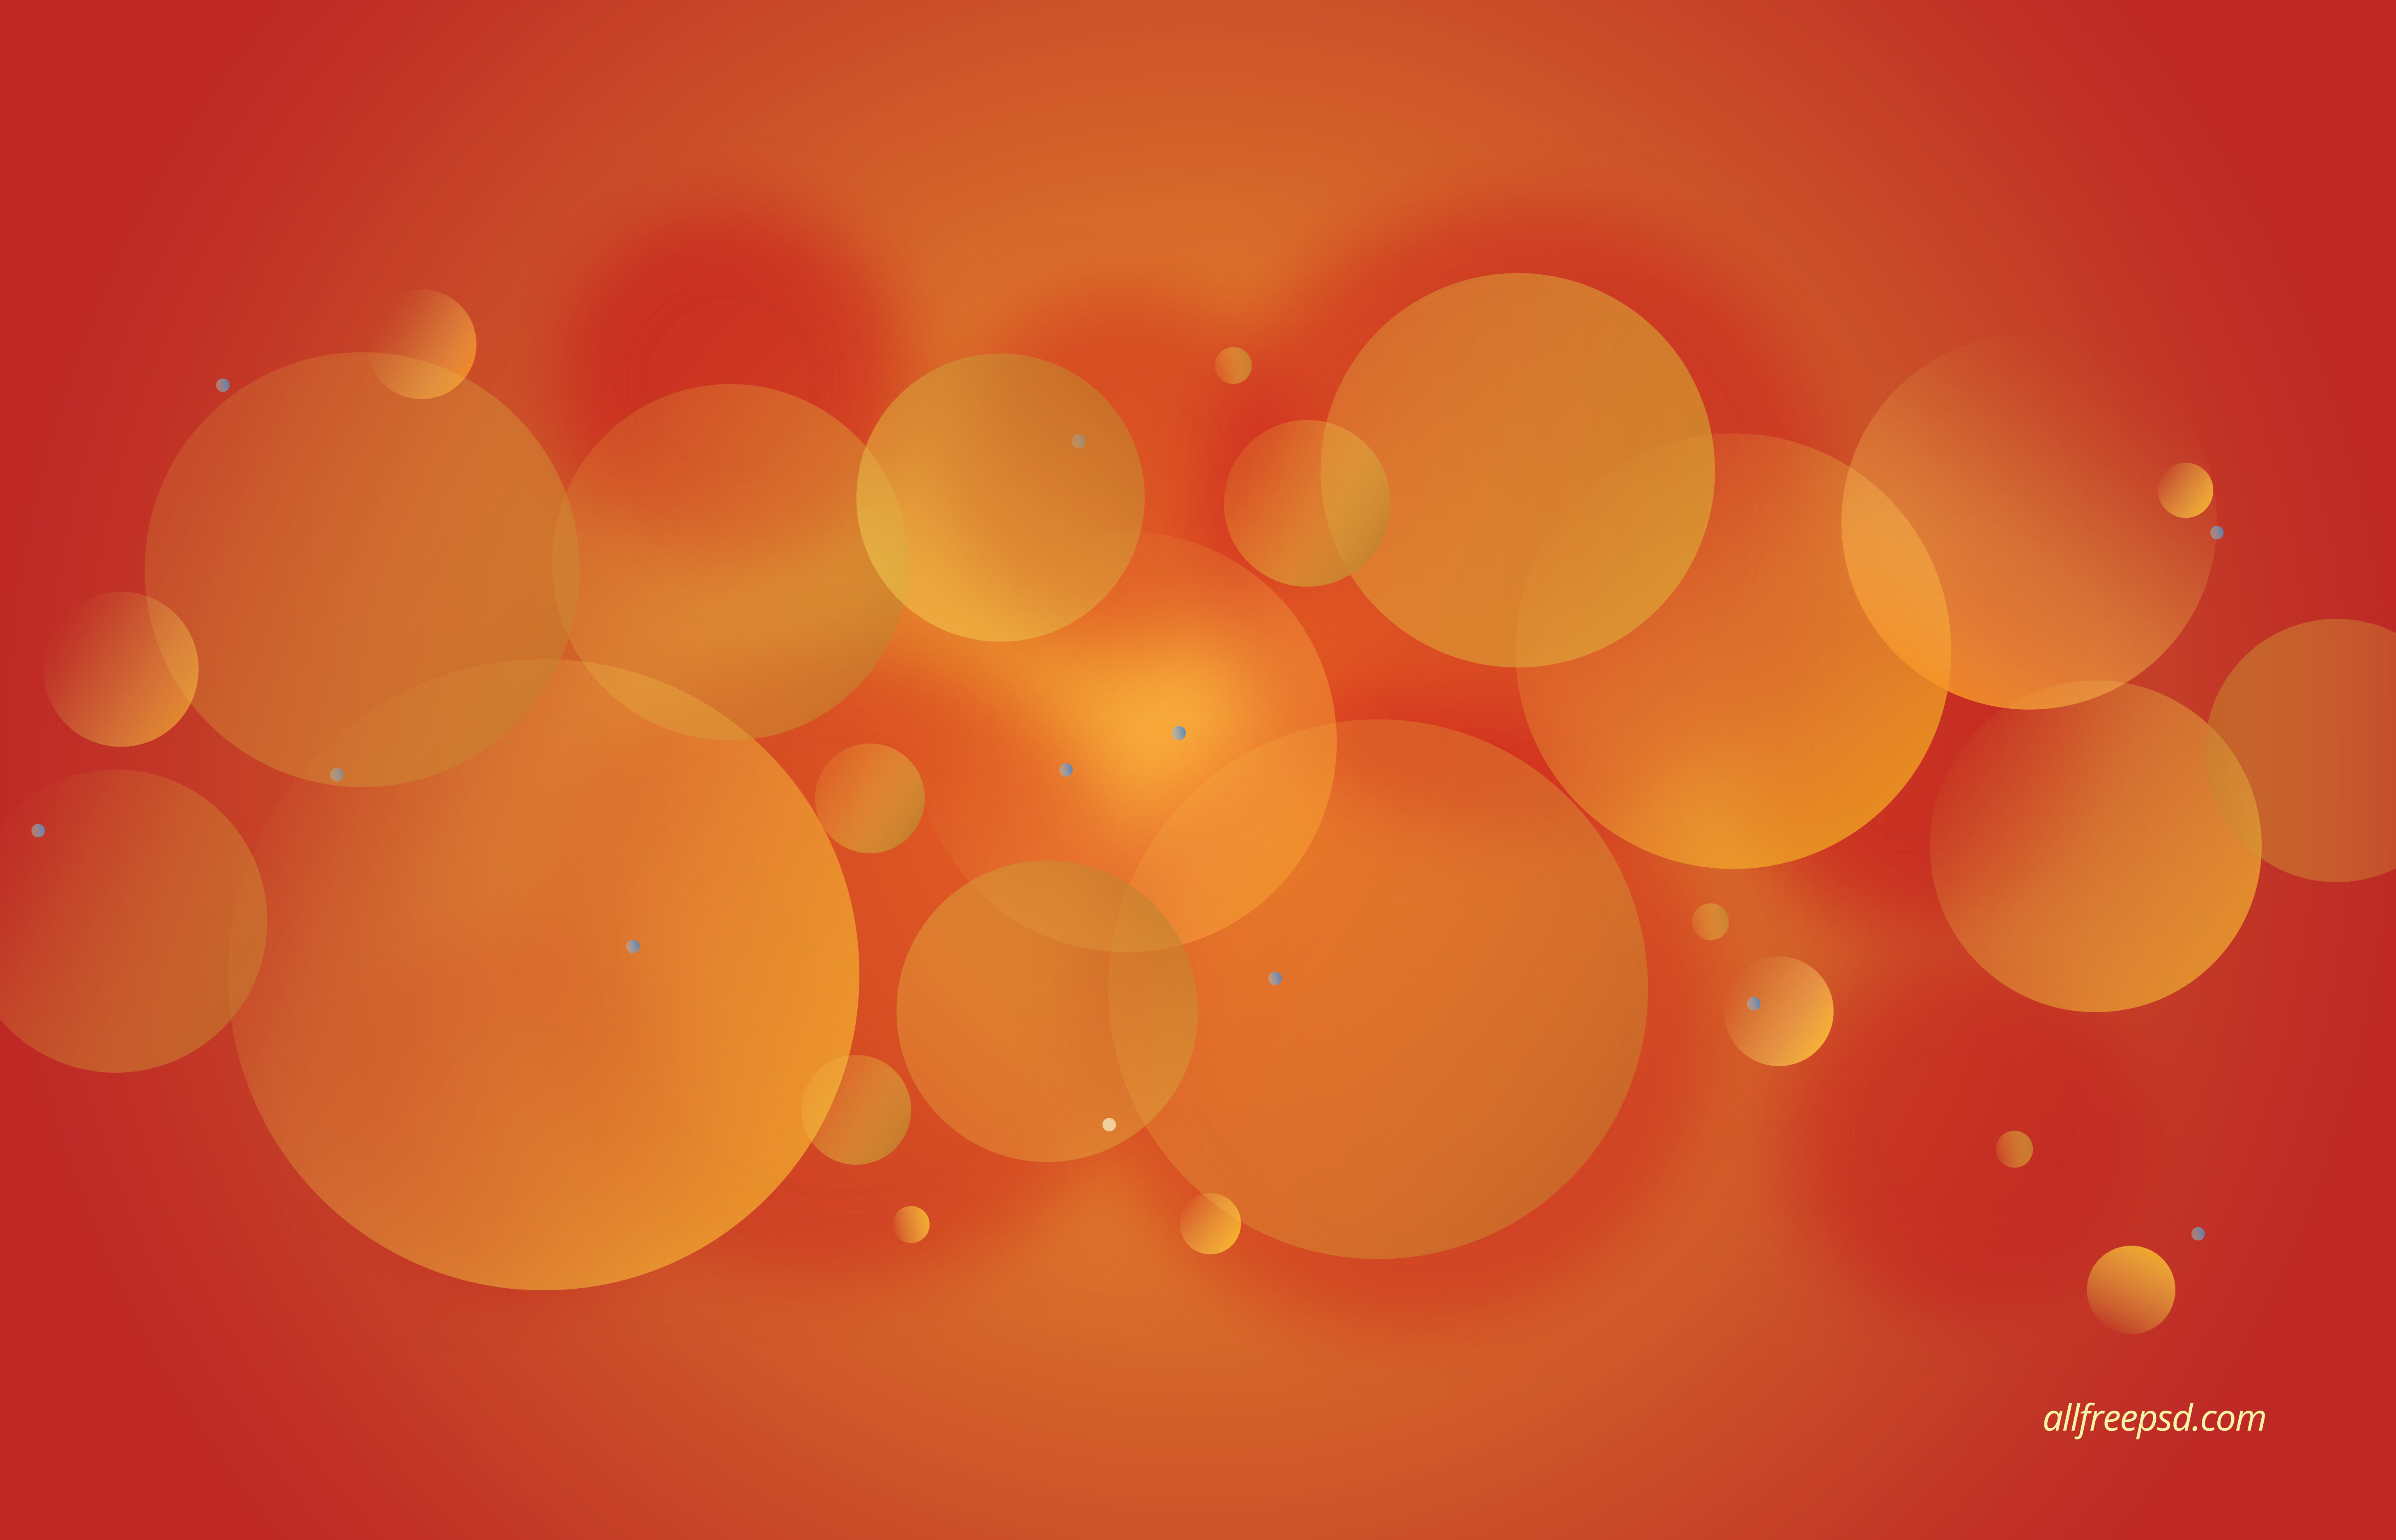 Orange Circle Pattern Background - Free psd and graphic designs